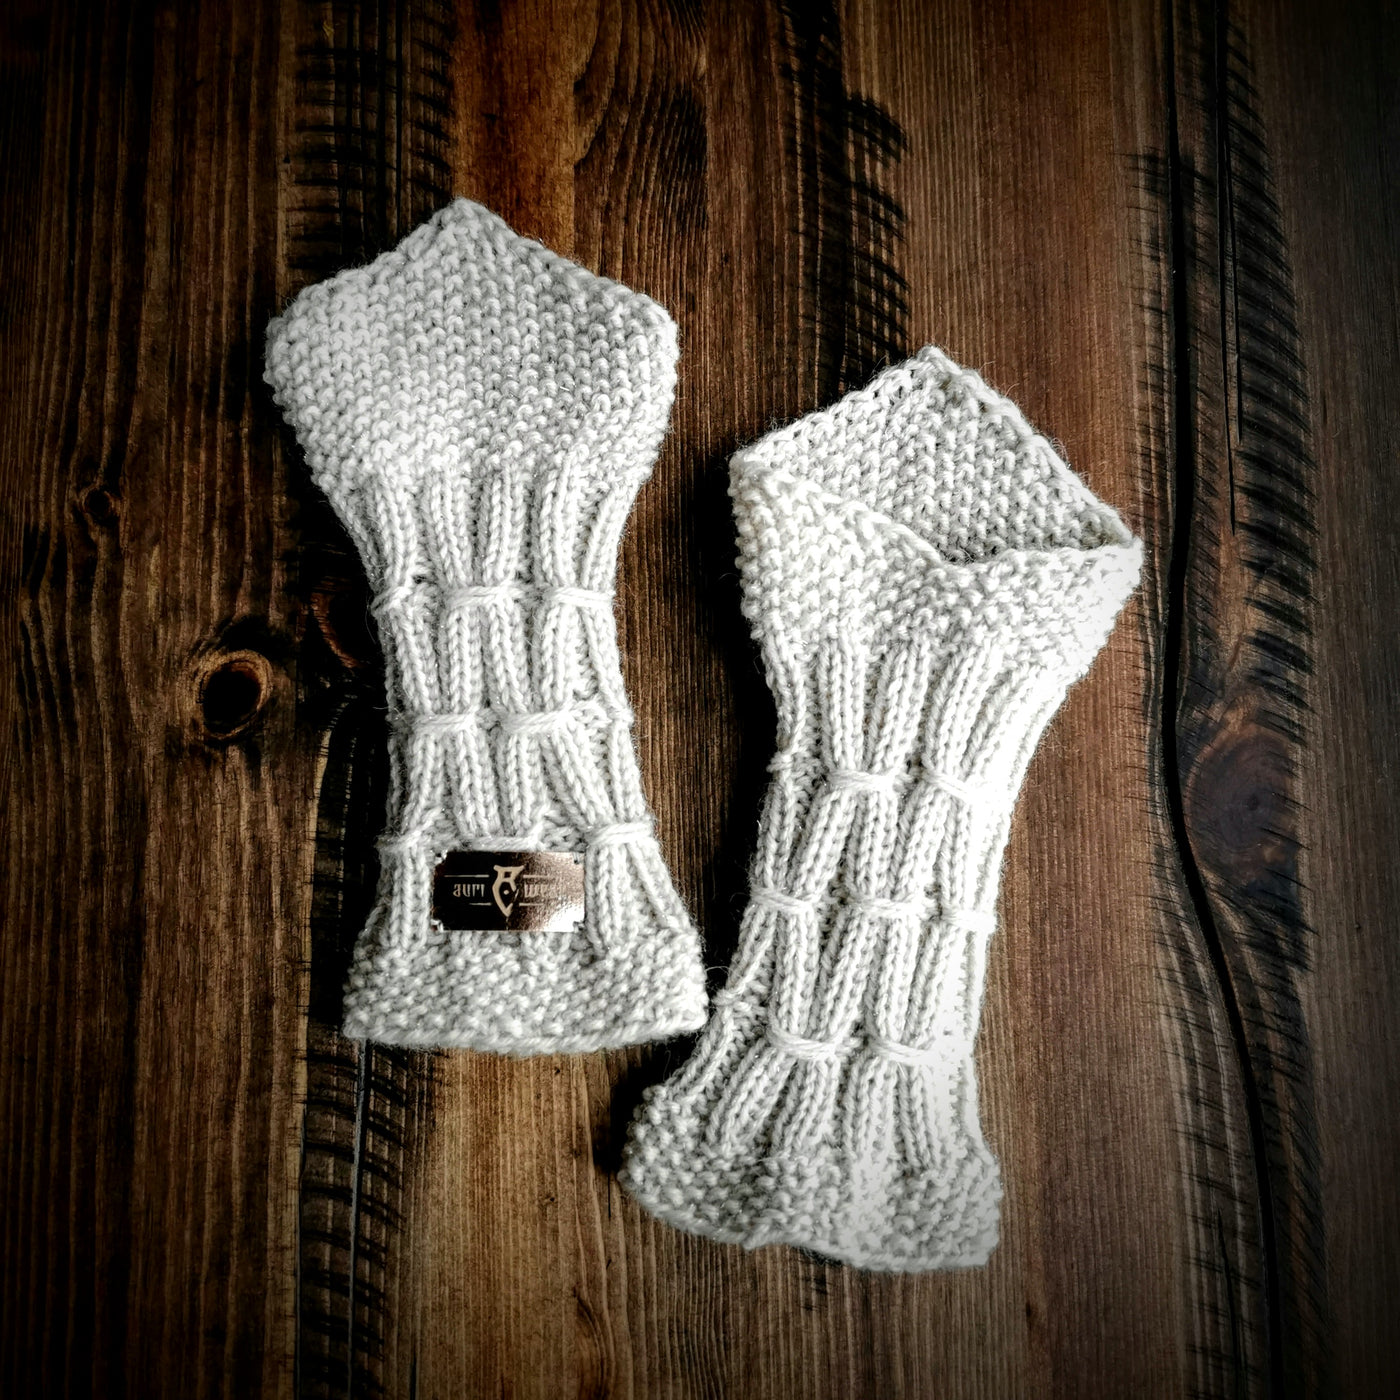 Handmade knitted sparkling white wrist warmers